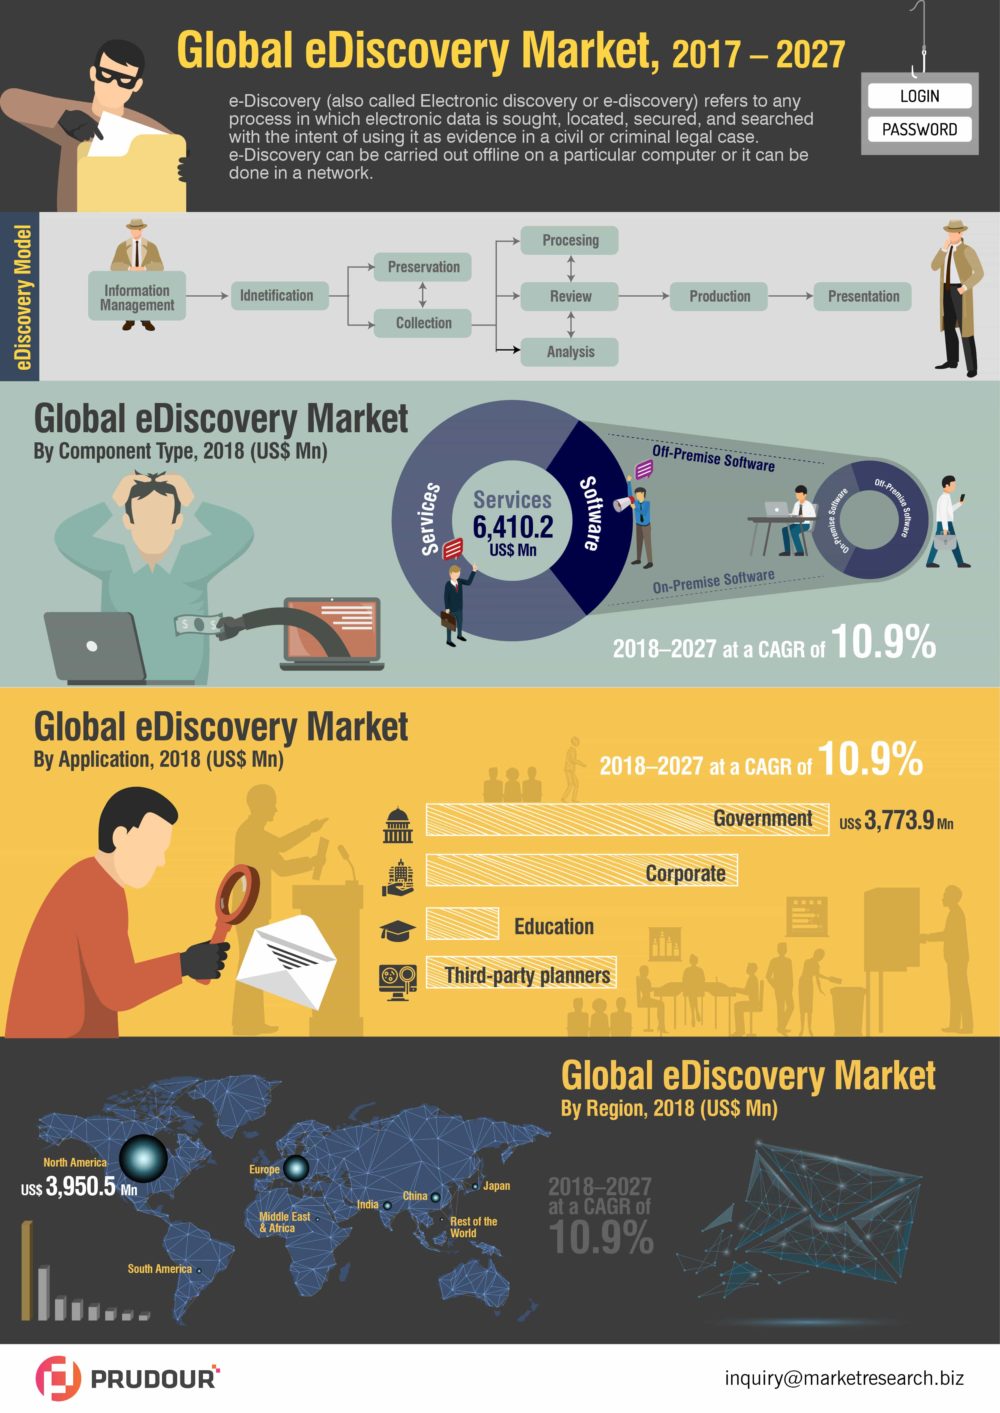 Worldwide e-Discovery Market About To Hit CAGR of 10.9% From 2018 to 2027